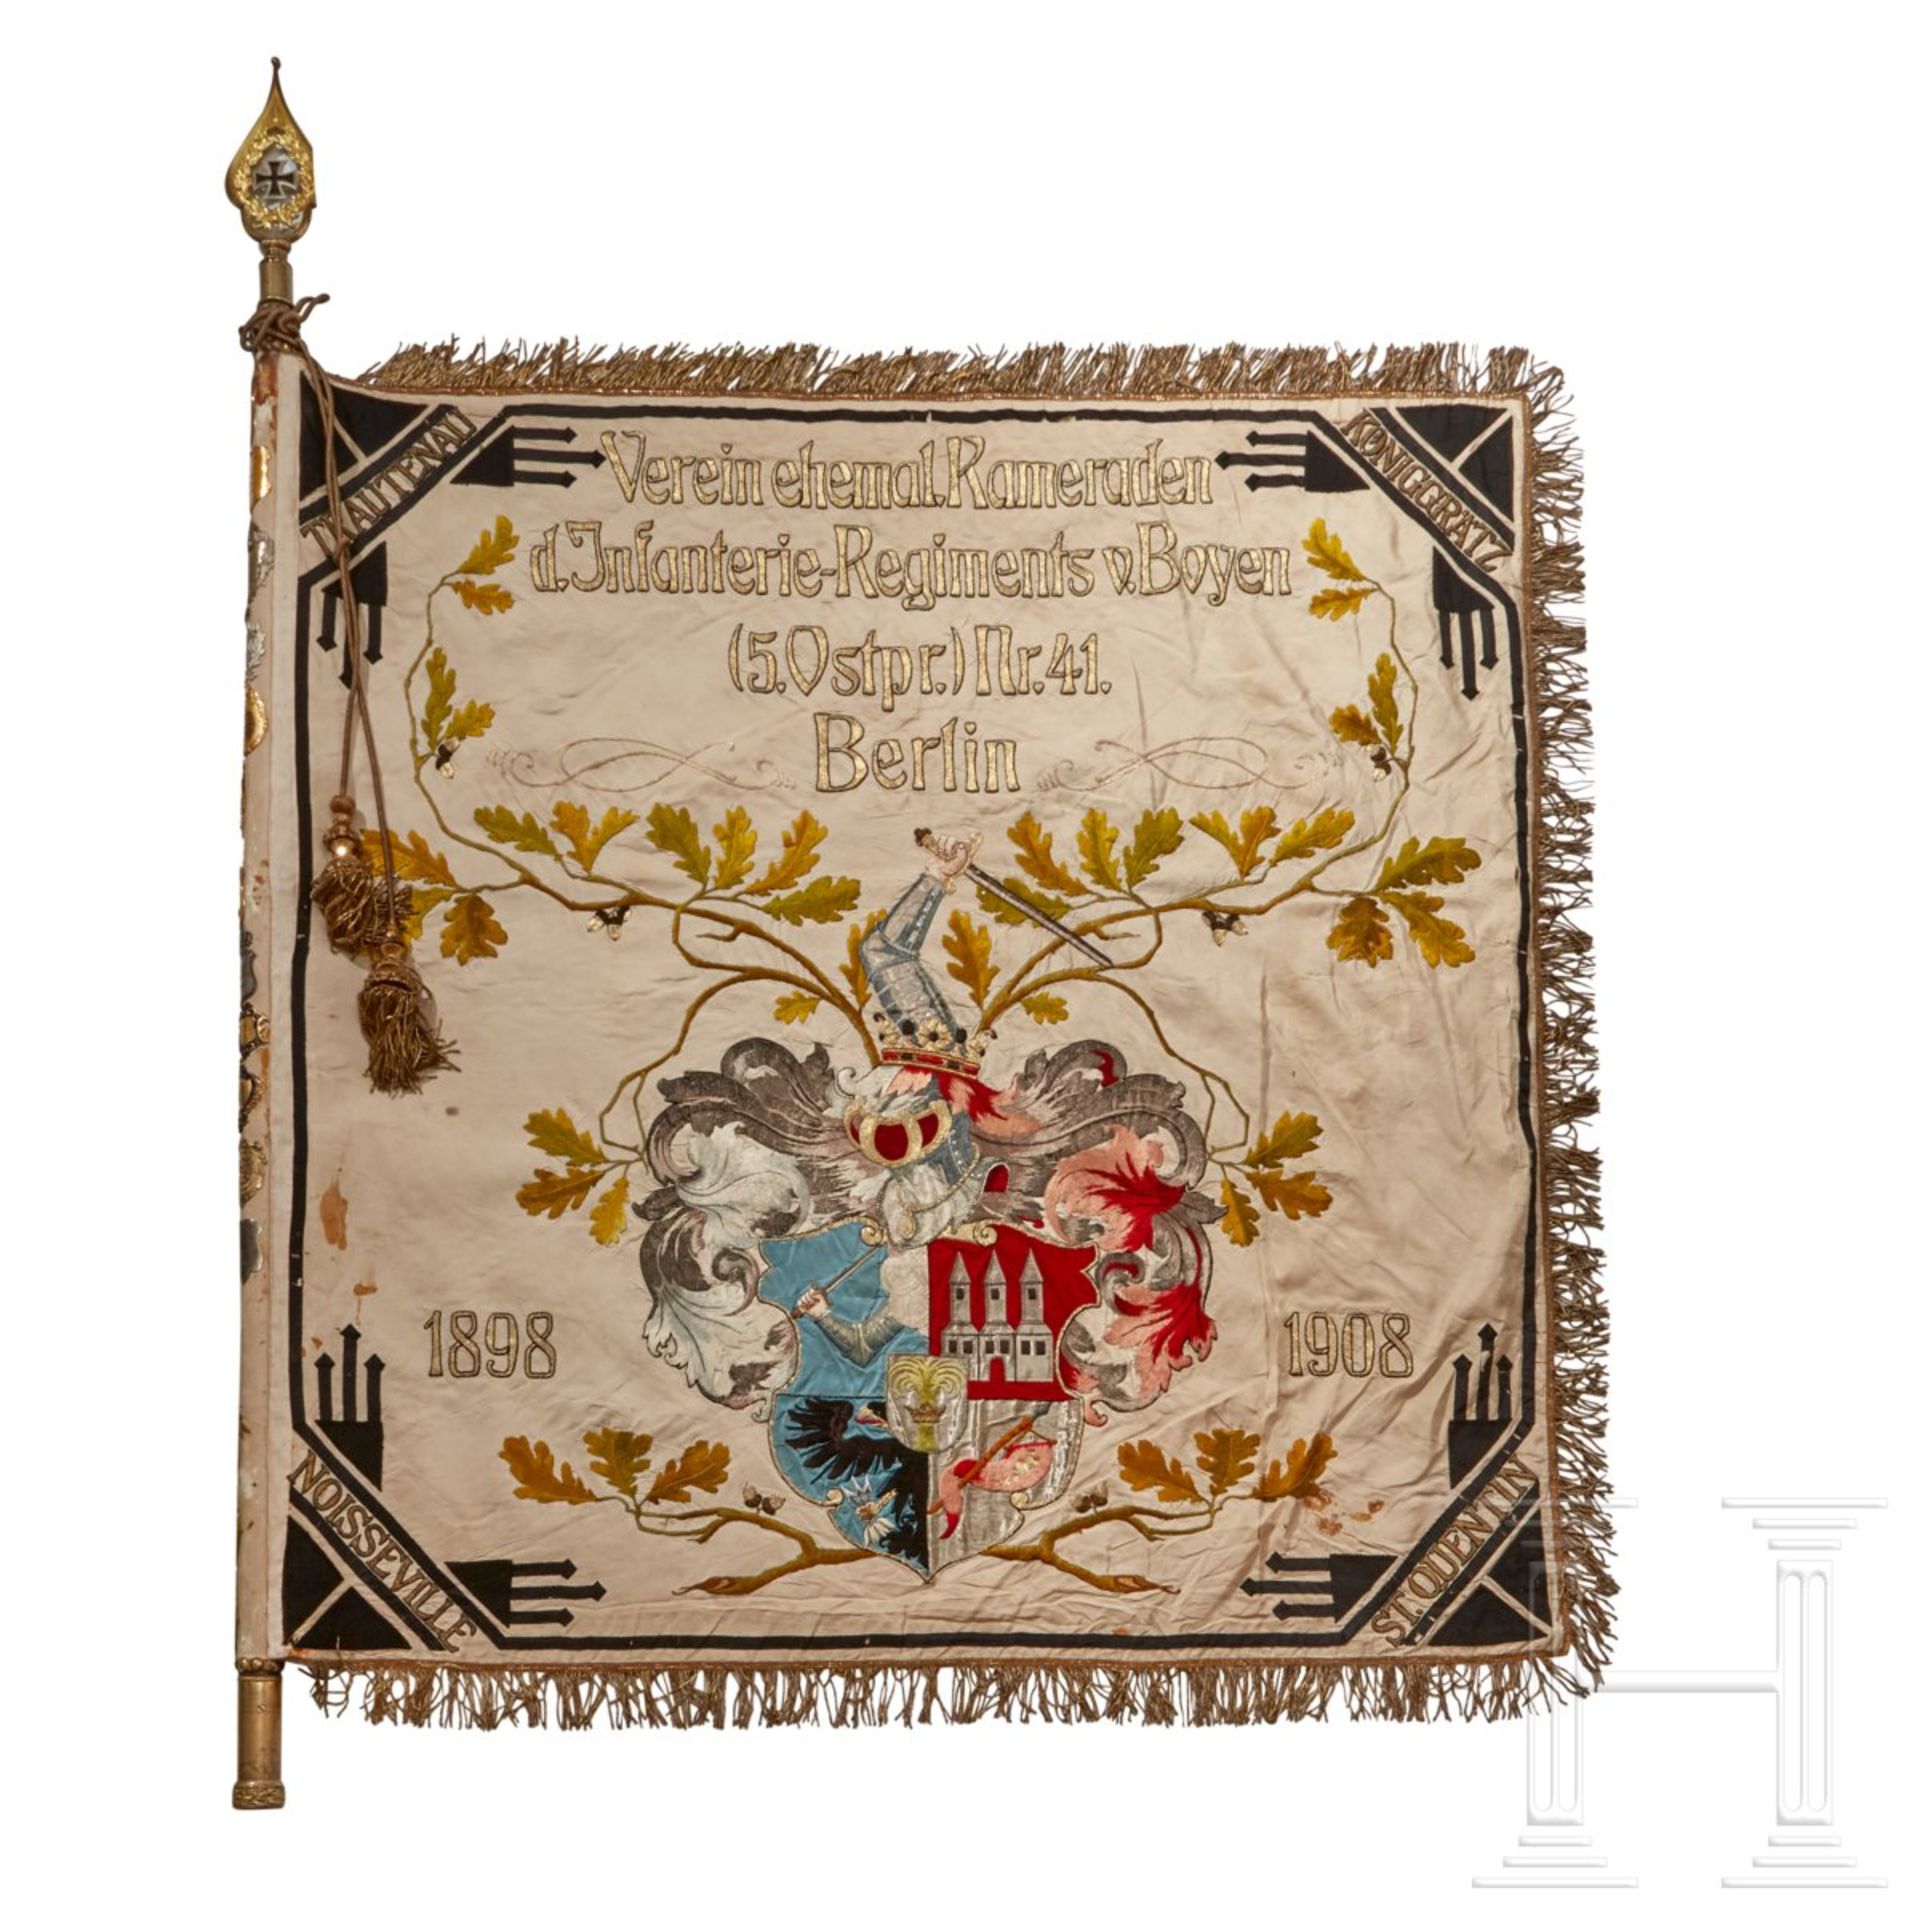 A Veteran Regimental FlagDouble sided white silk base, elaborate embroidery of various colored and